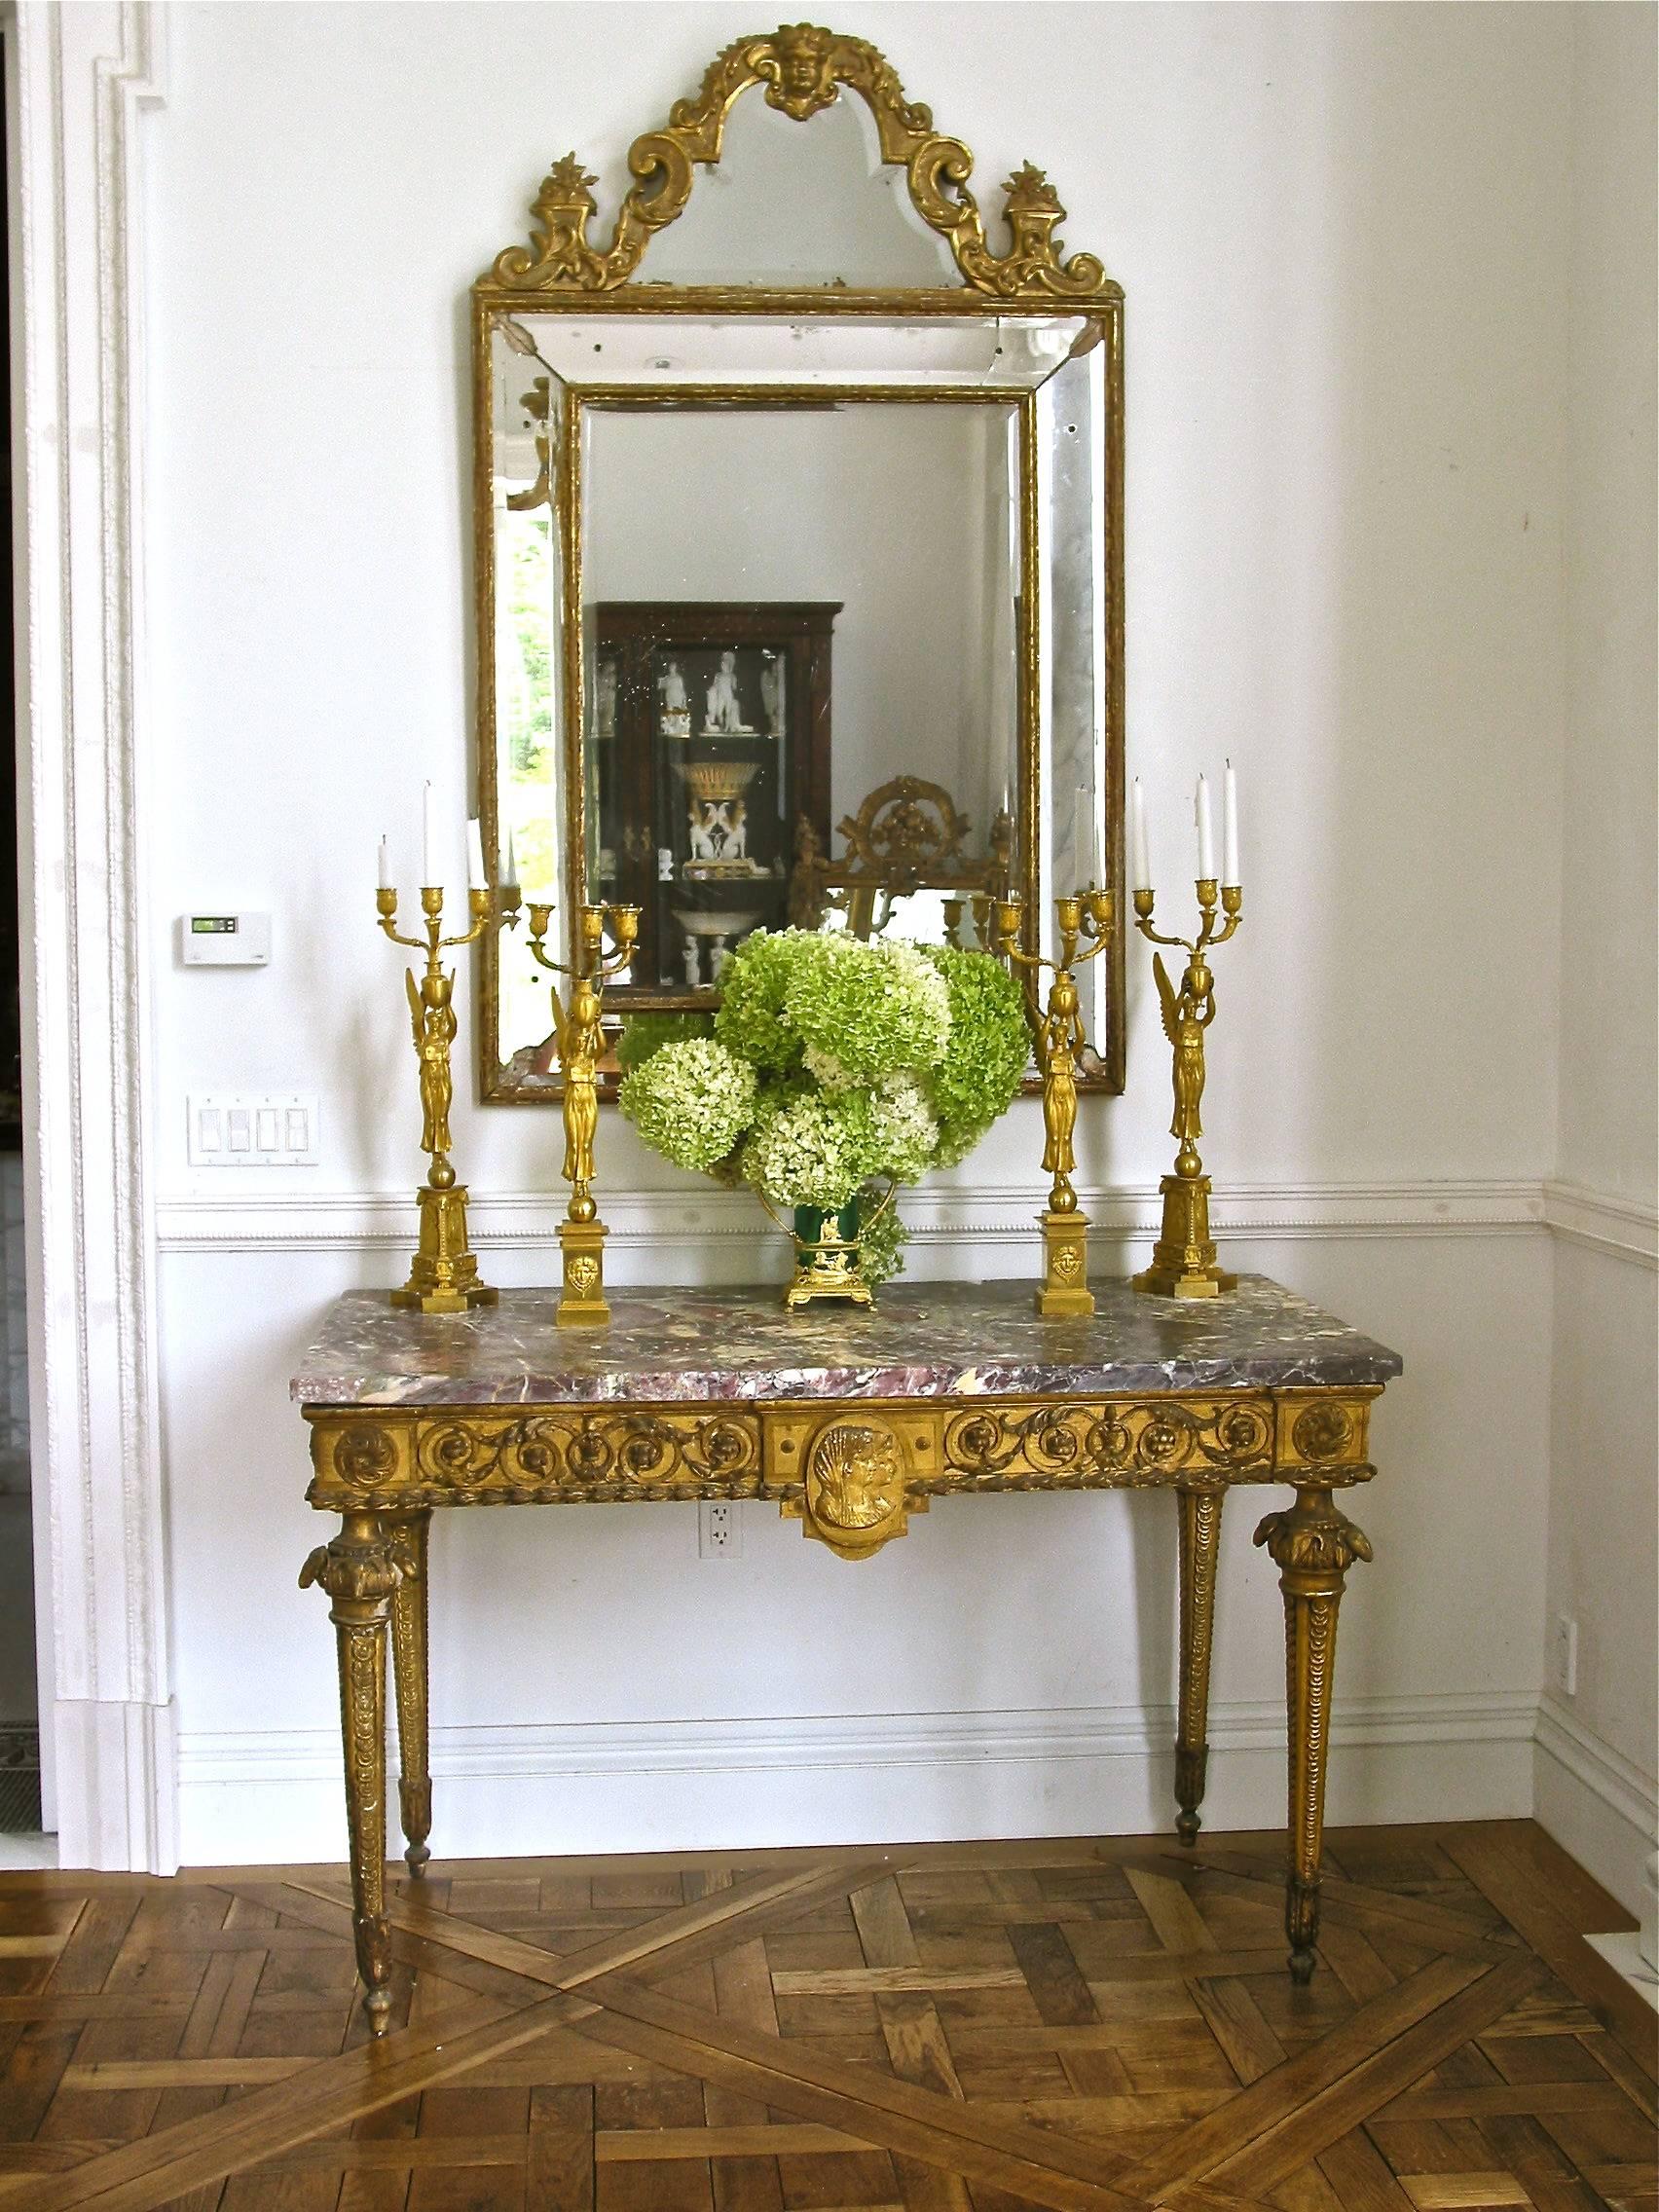 Rare Agrarian inspired neoclassical console table. Italian, original marble slab top. Profile plaque of two women, possibly the owners of the villa from which the table came. Side roundel of wheat indicating County Tuscan Villa Engaged in Grain